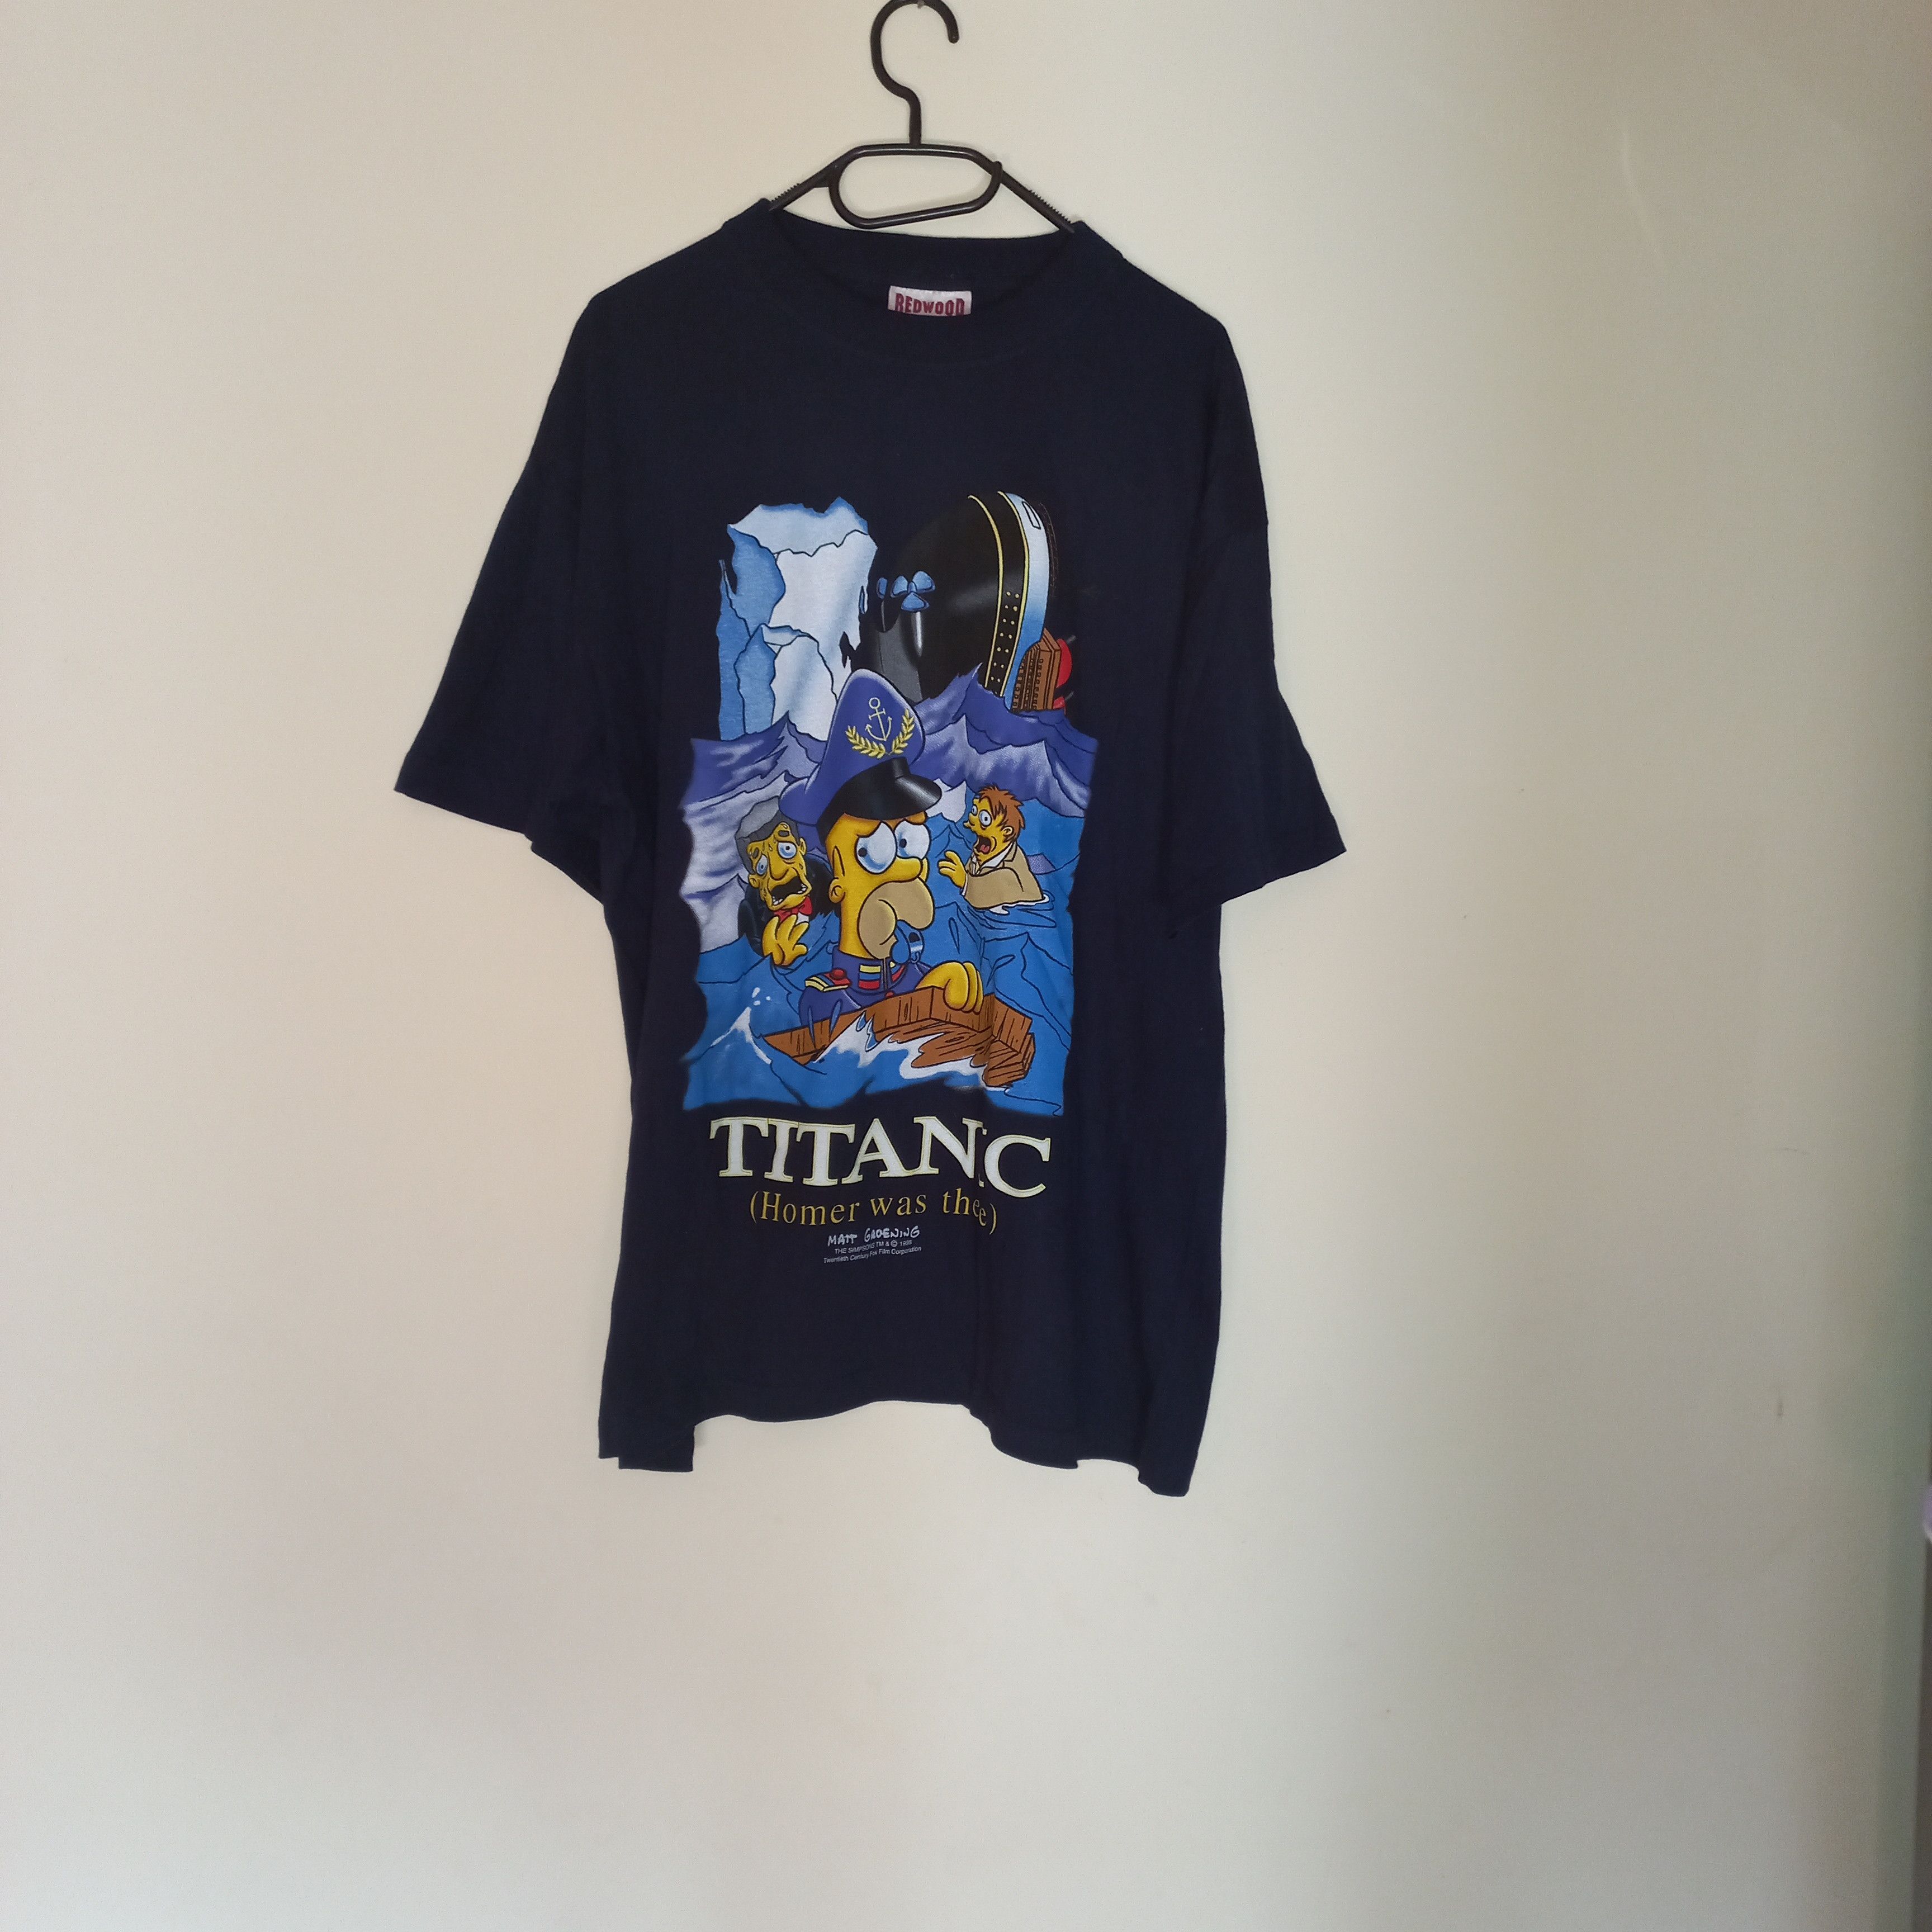 Rwd Redwood Vintage 1998 Titanic The Simpsons 'Homer Was There' Size US XL / EU 56 / 4 - 6 Preview